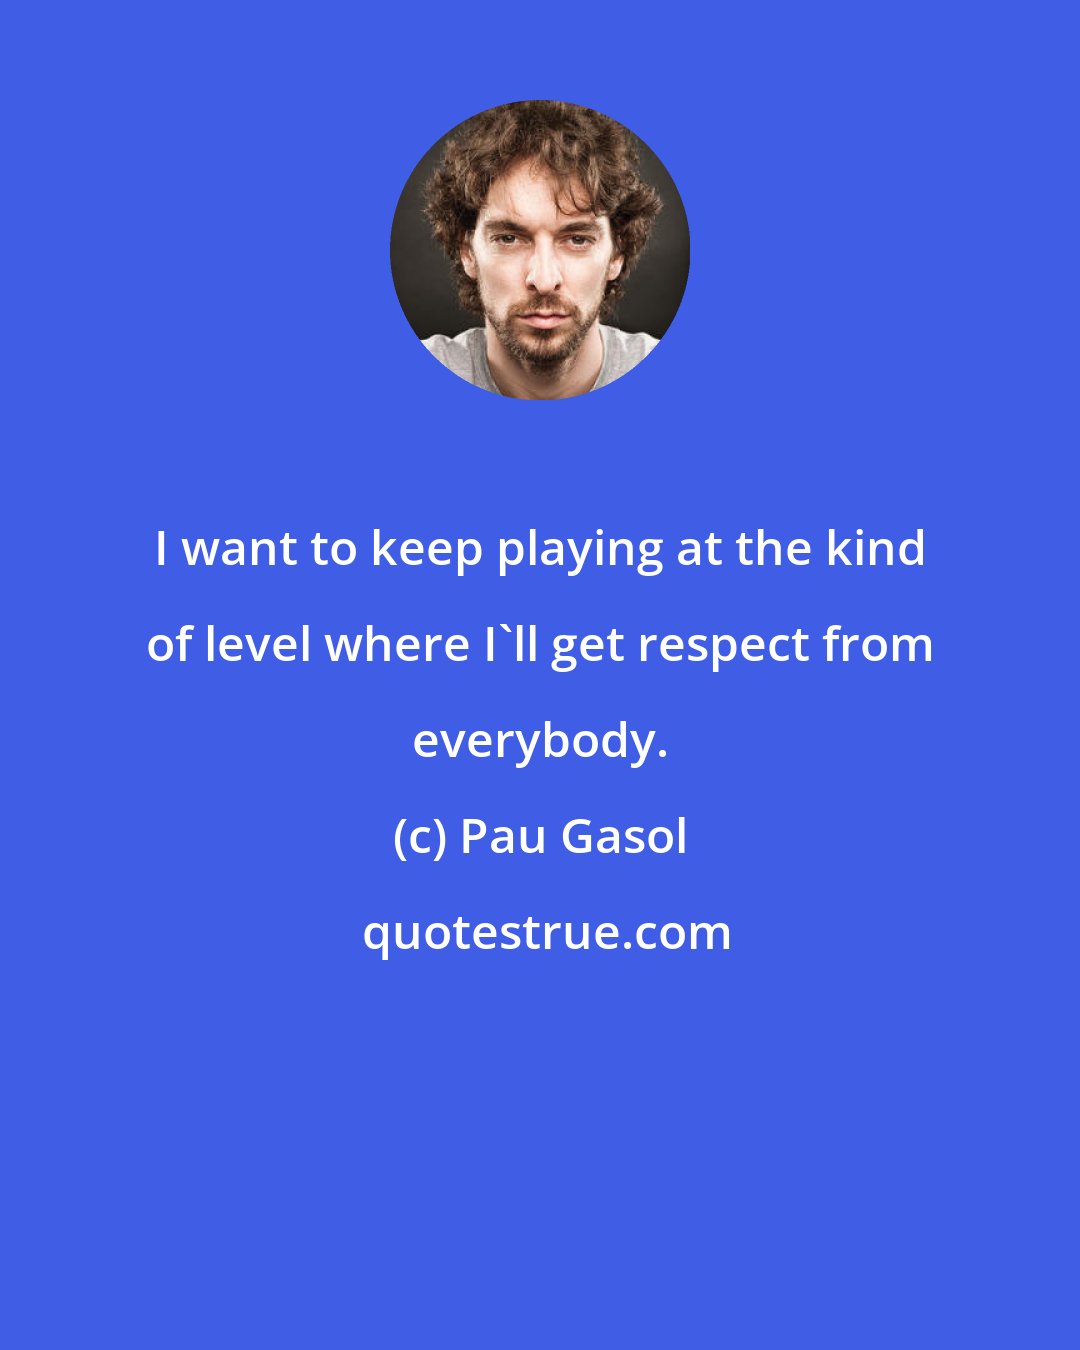 Pau Gasol: I want to keep playing at the kind of level where I'll get respect from everybody.